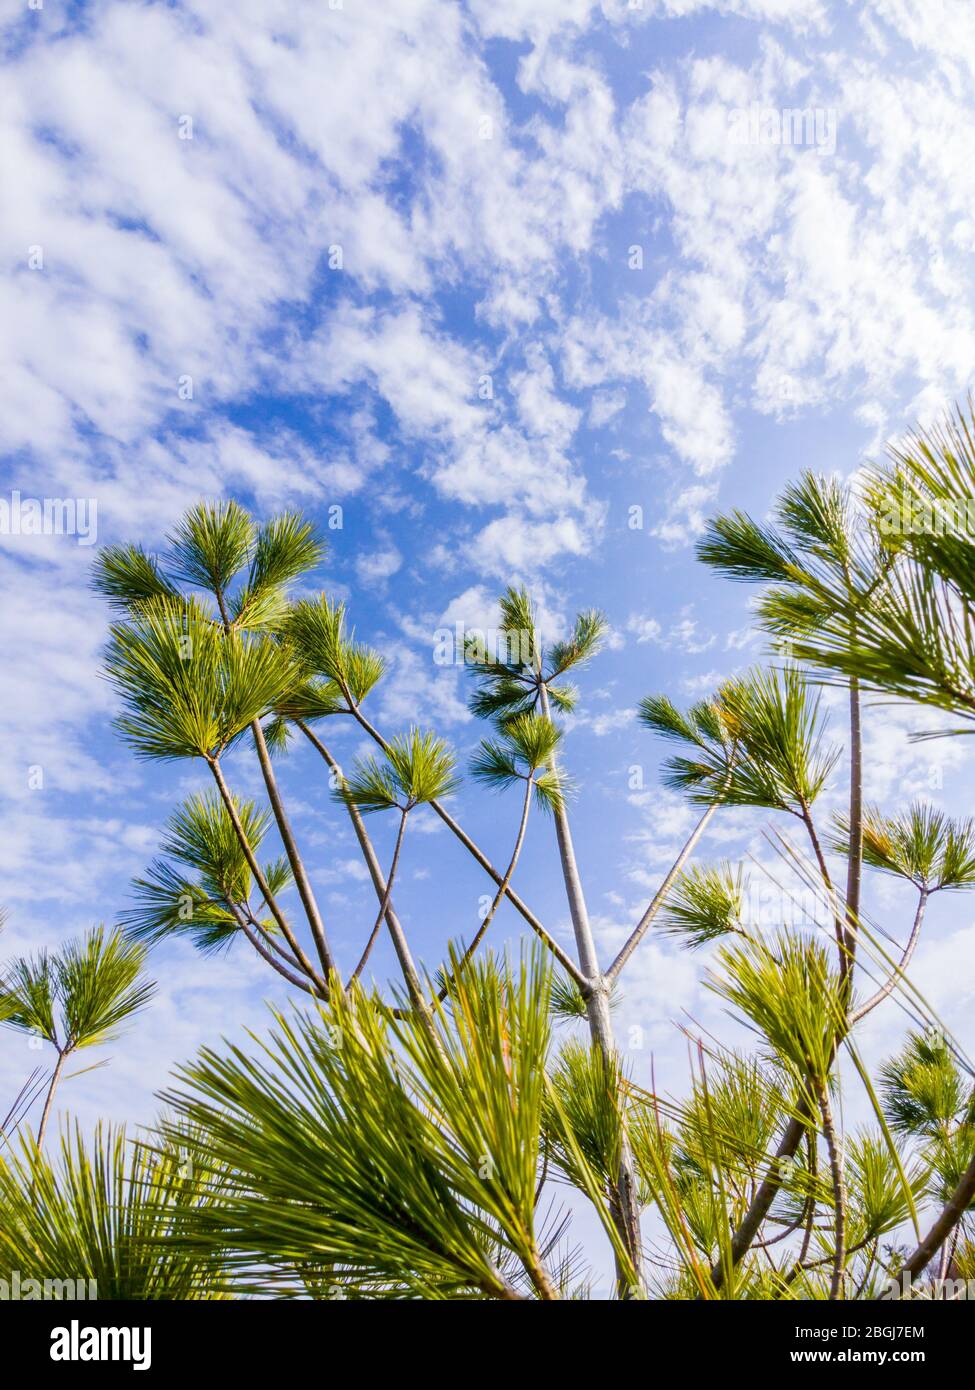 Sparse branches of long-needled evergreen tree against sky and clouds. Stock Photo